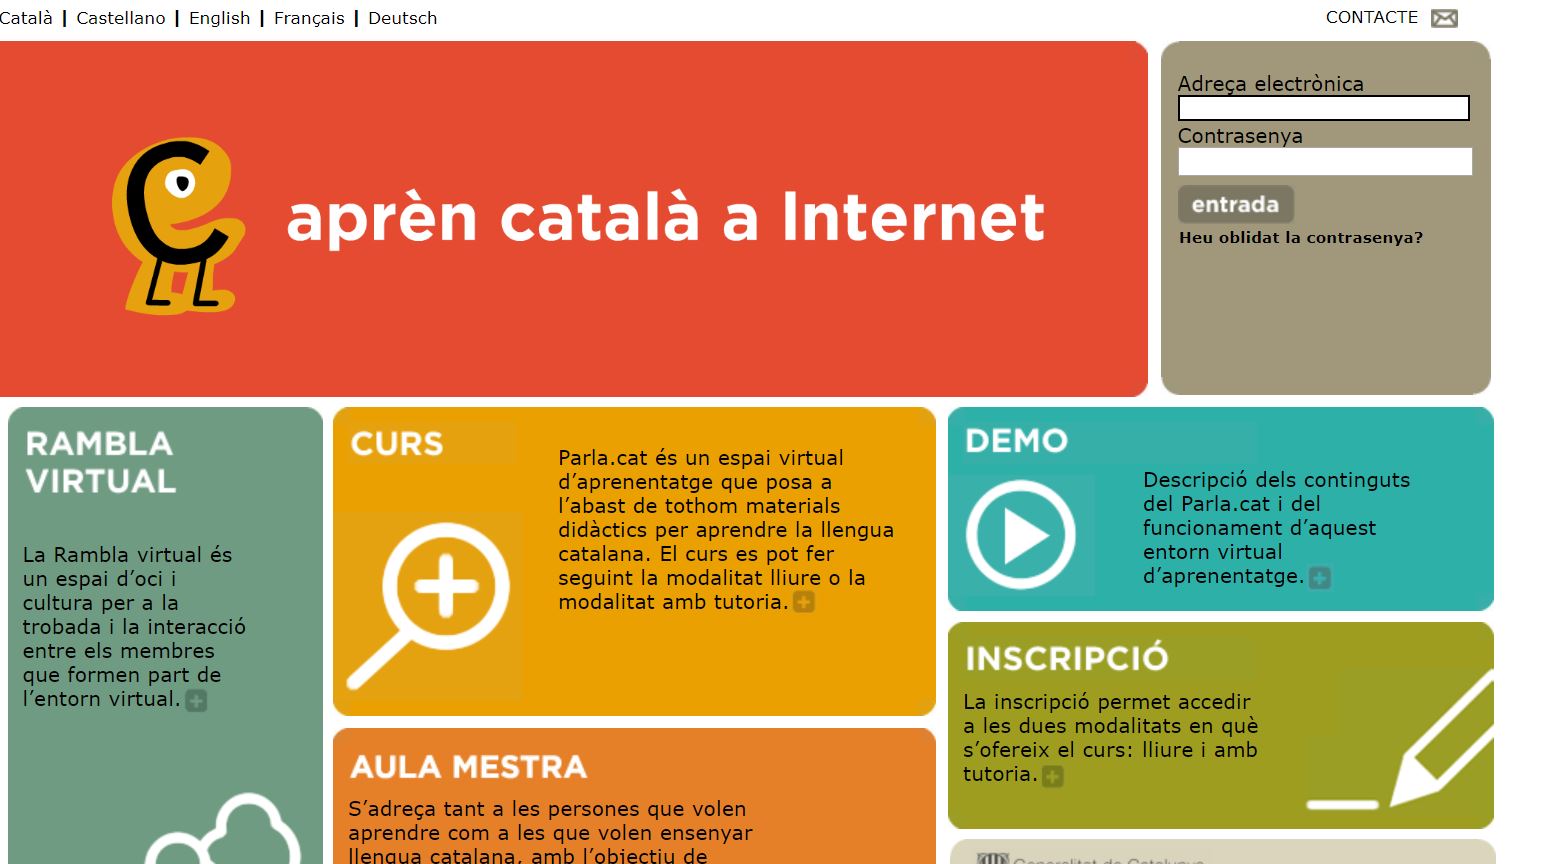 The Parla.cat website offers free online Catalan lessons